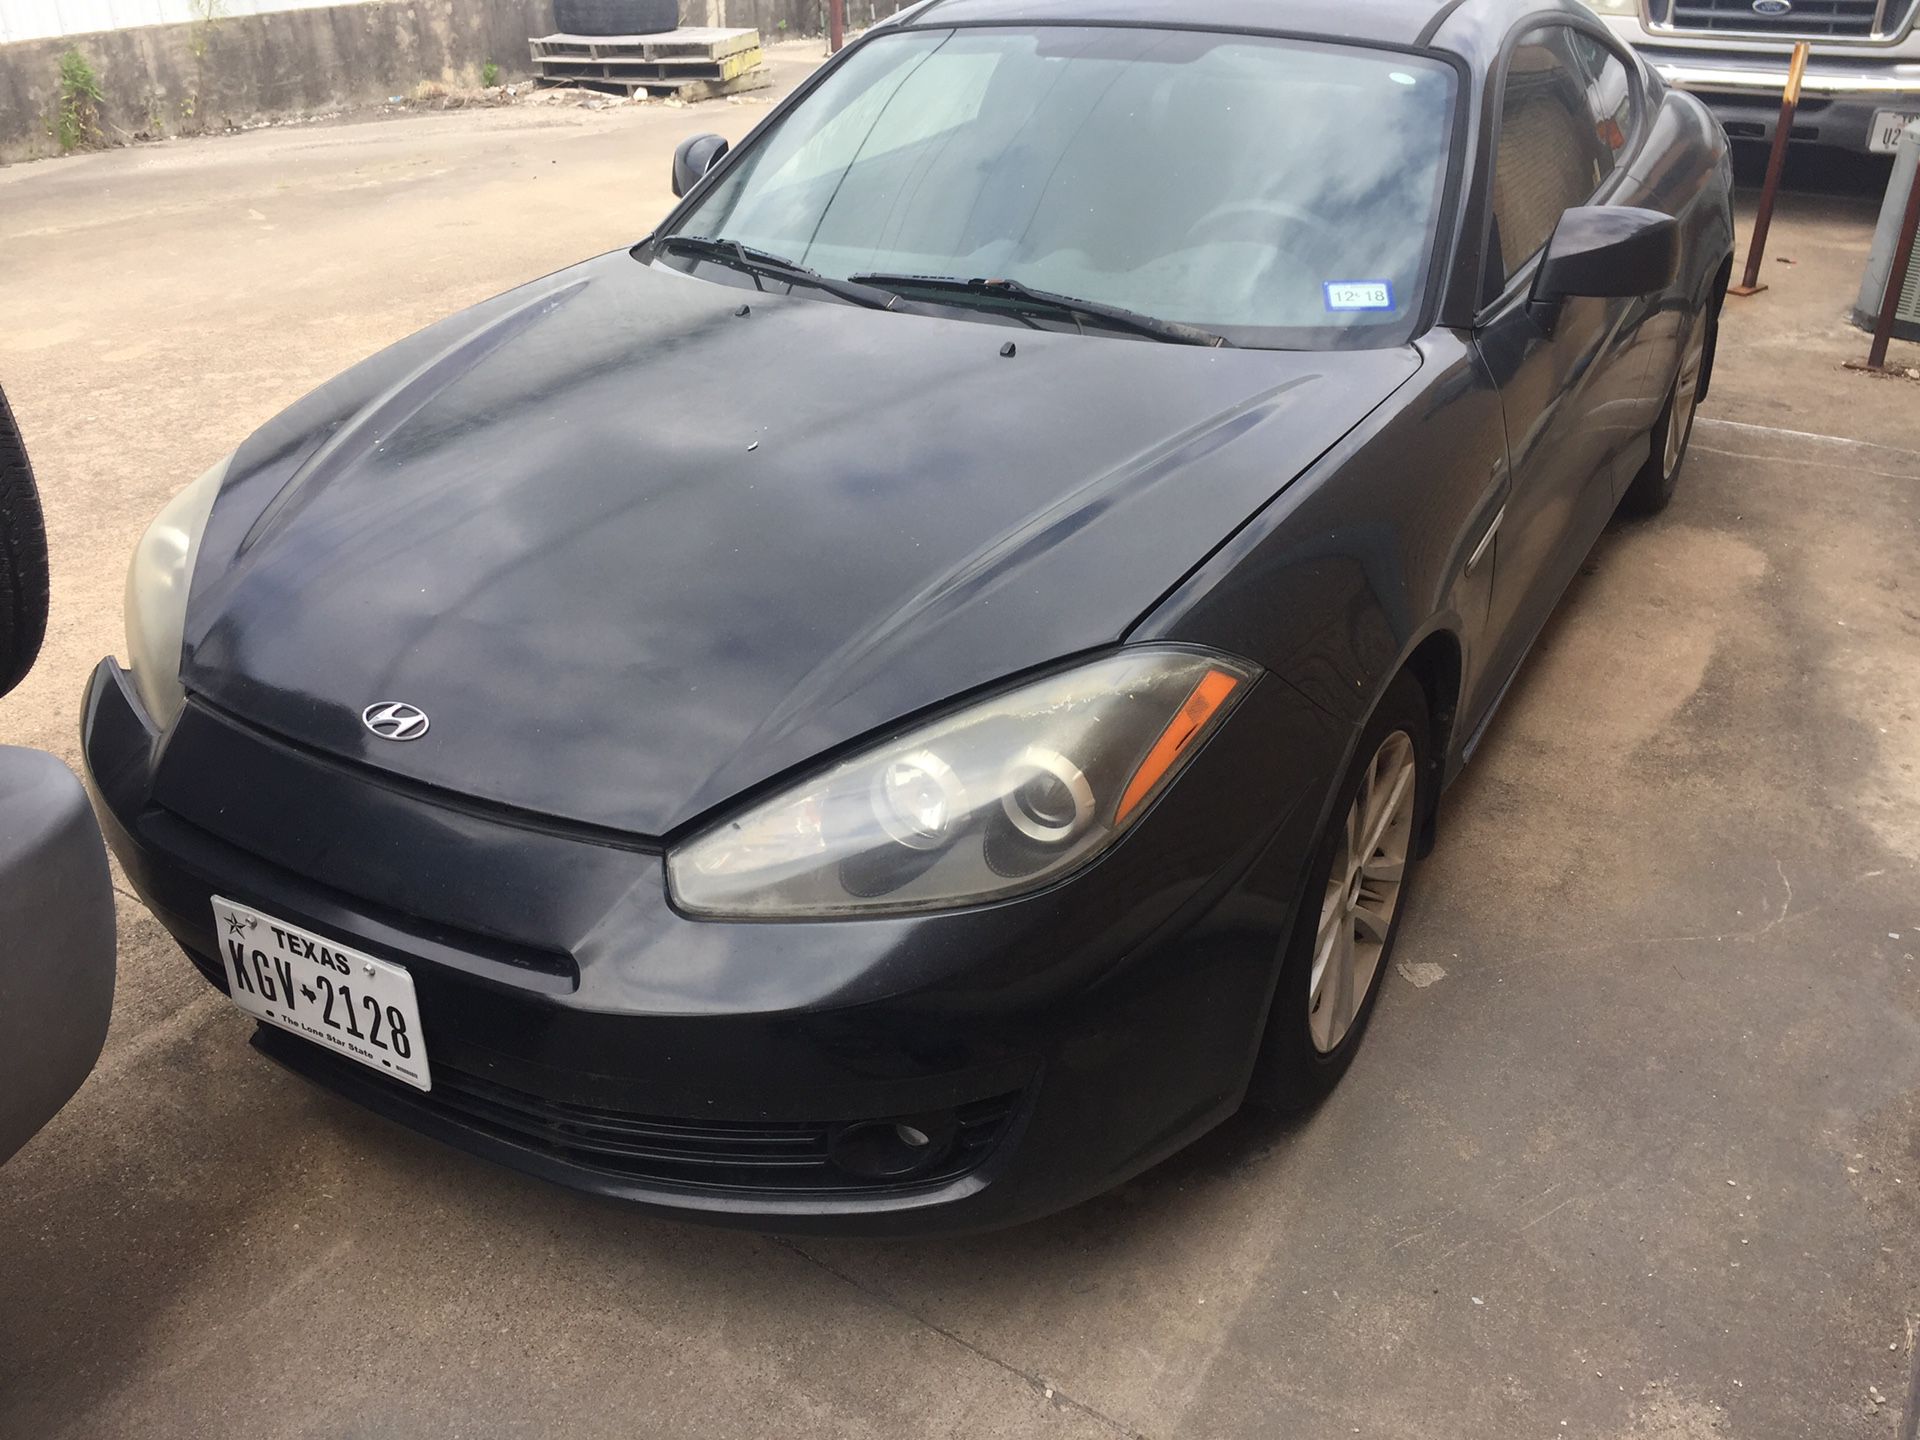 Junk cars you pull it 2008 Hyundai Tiburon for Parts or Sale in whole